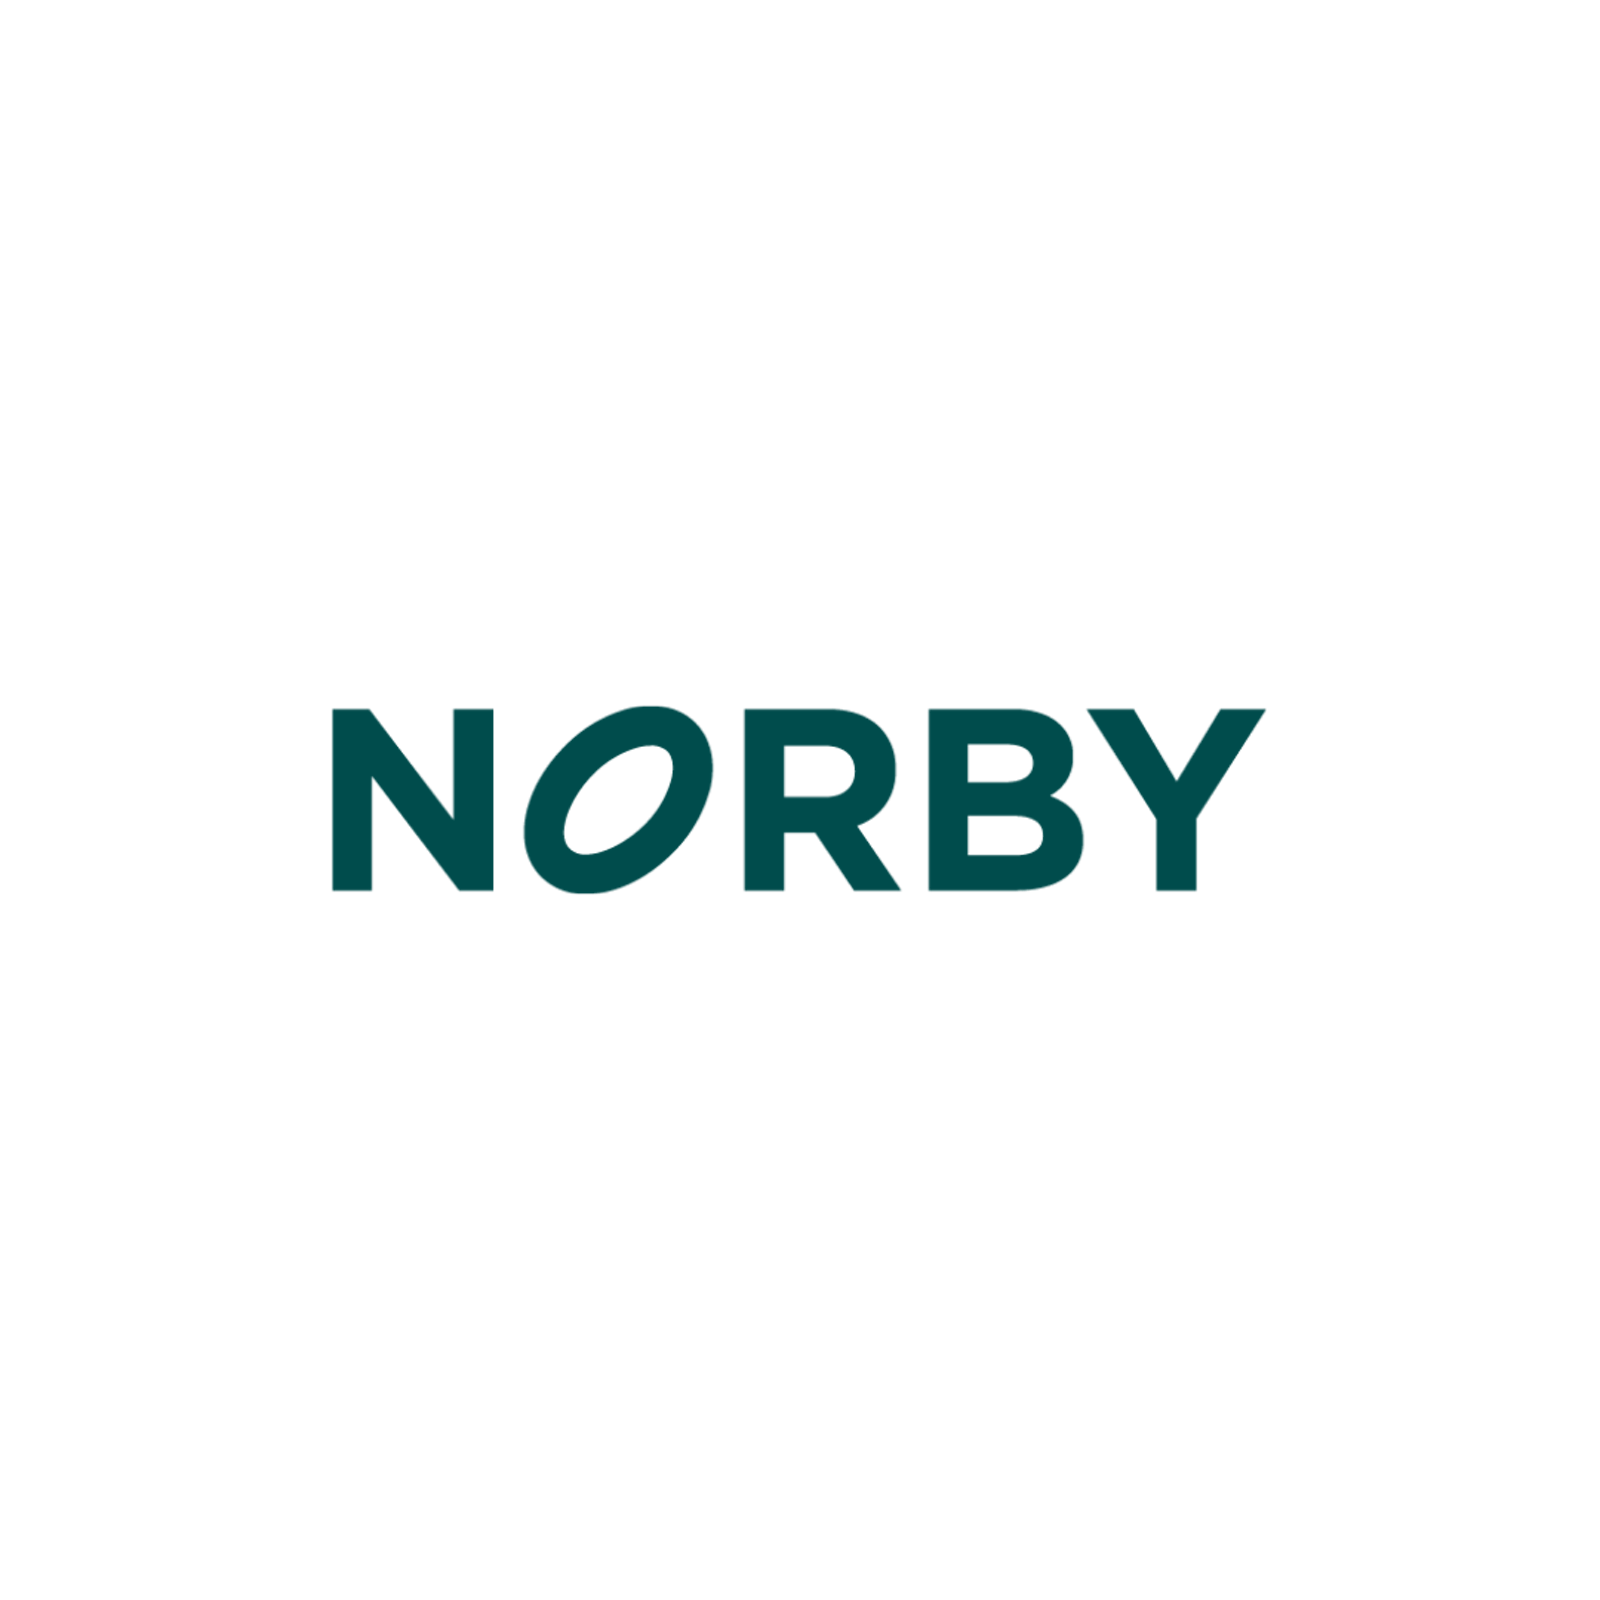 NORBY